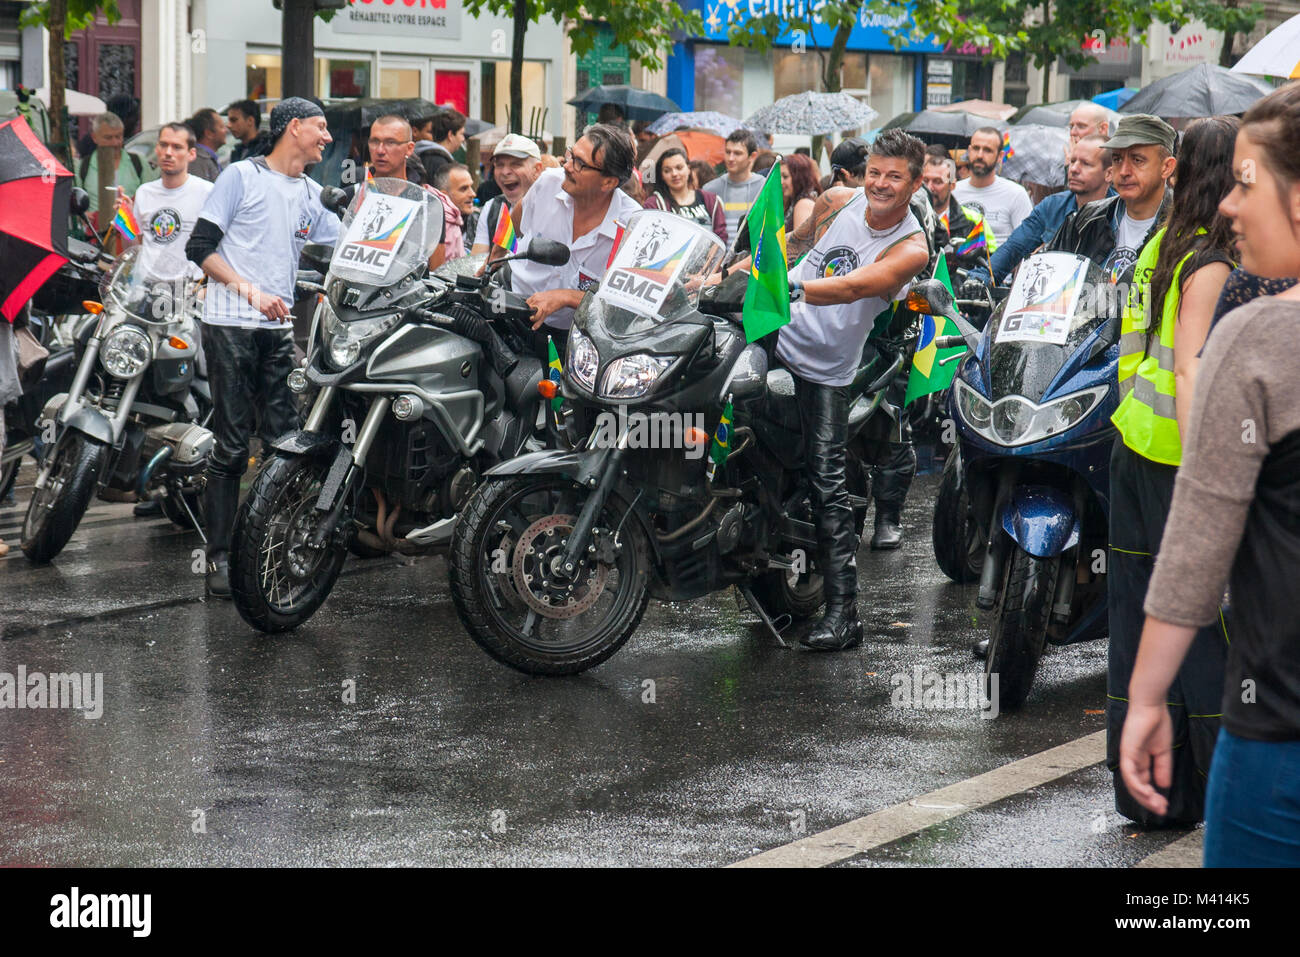 Members of the french Gay Motor Club (GMC) participating in the Gay Pride at Boulevard Beaumarchais on a rainy day, Paris, France. Stock Photo